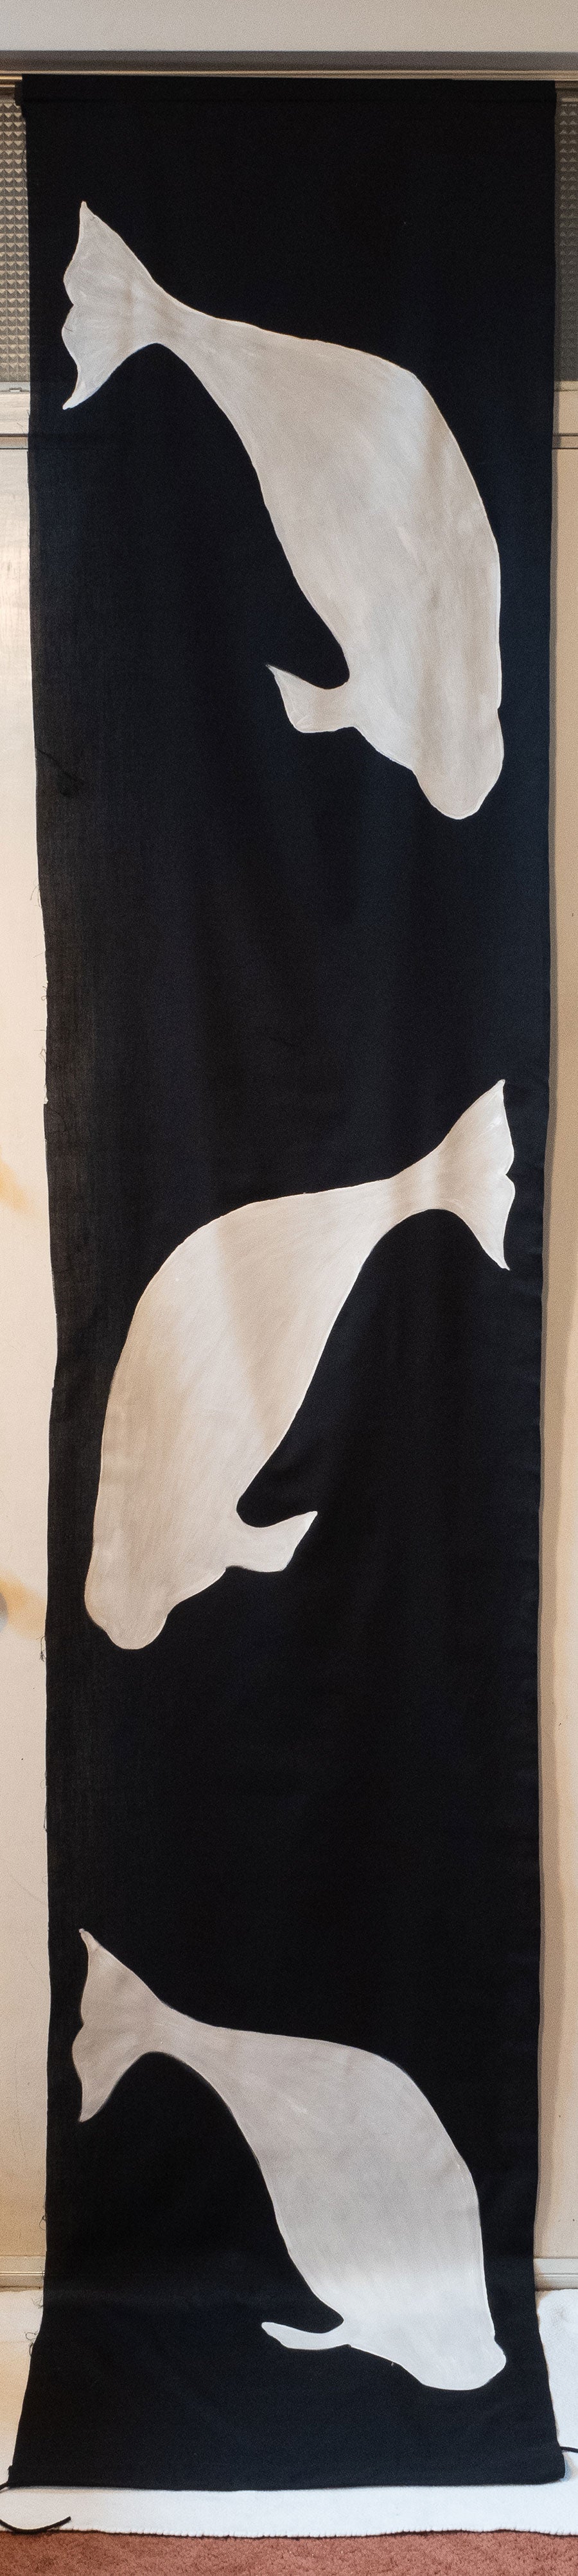 Beluga whales in black and white on a tall banner.